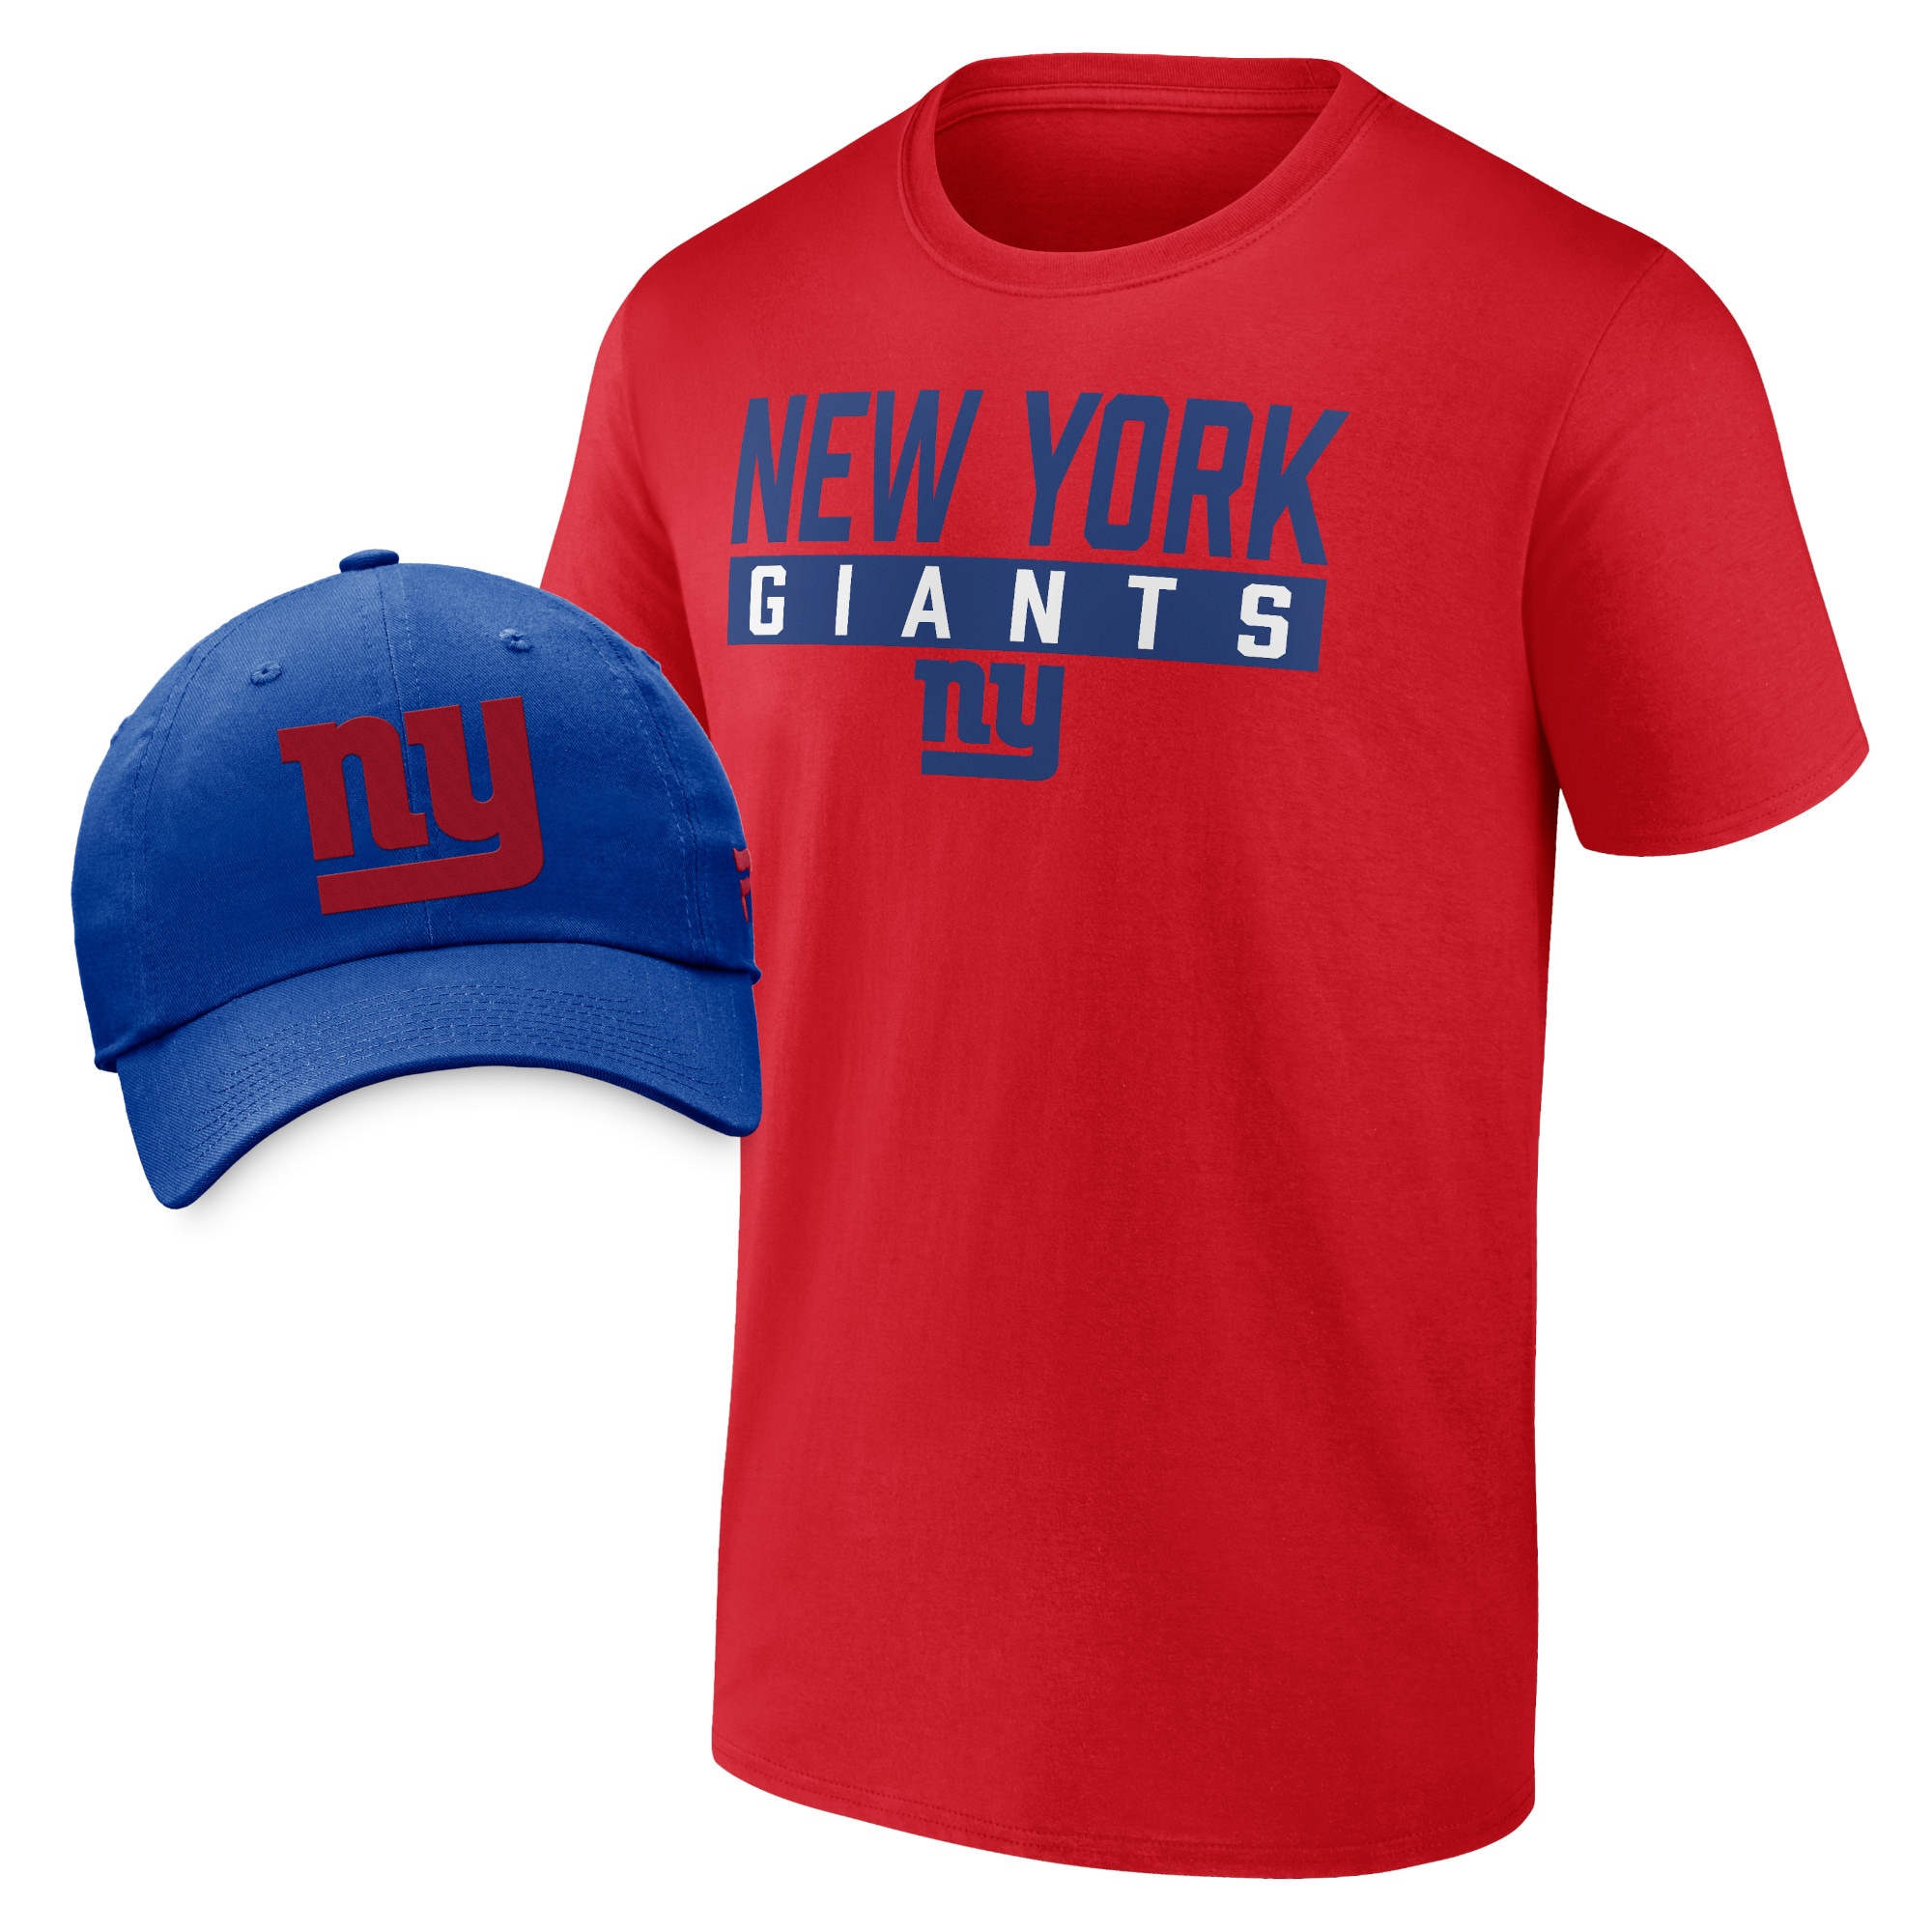 New york giants hats to Elevate Your Game Day Style缩略图